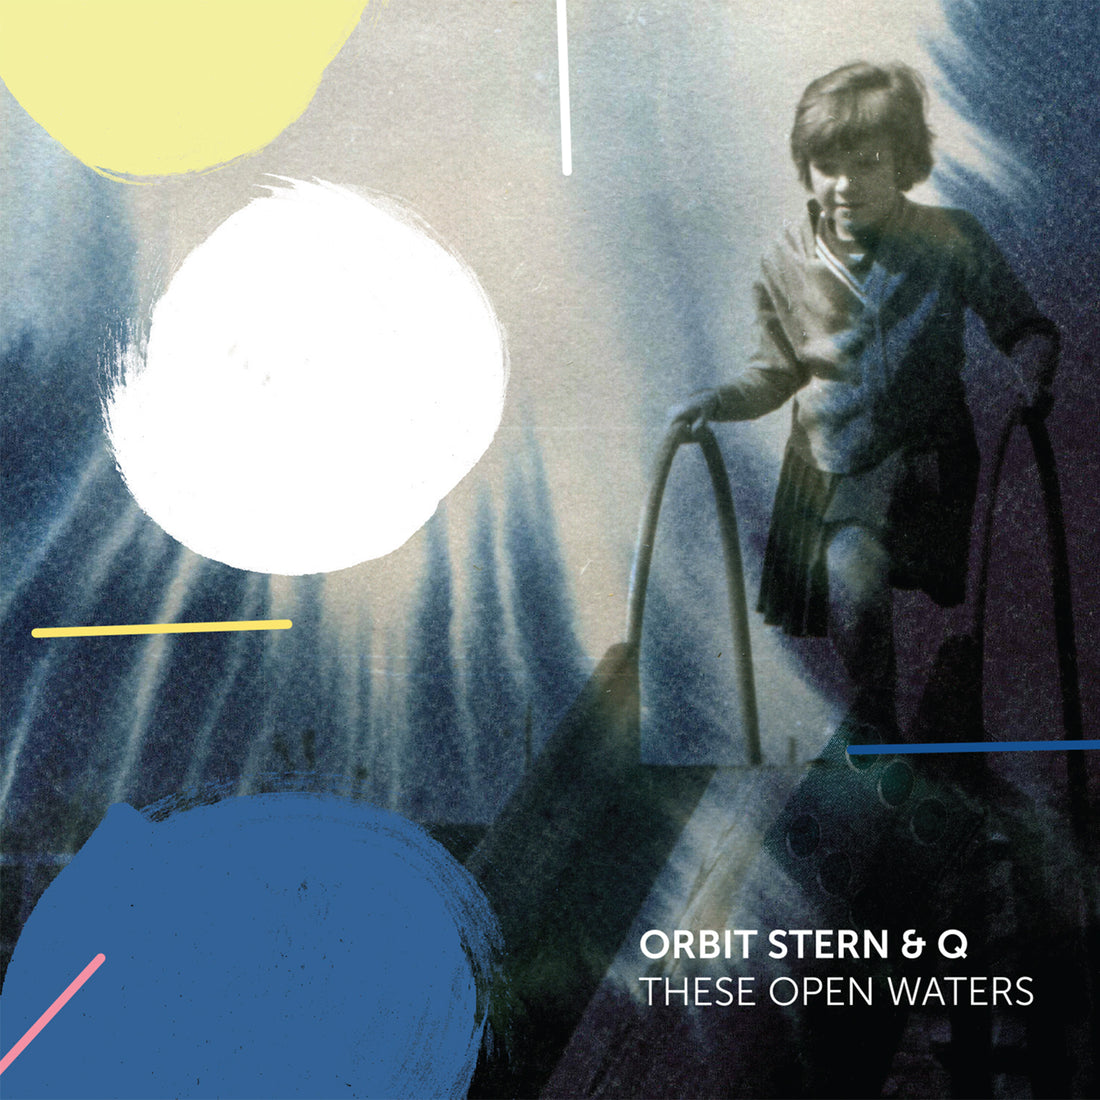 First autumn release 2017 - Orbit Stern & Q "These Open Waters"